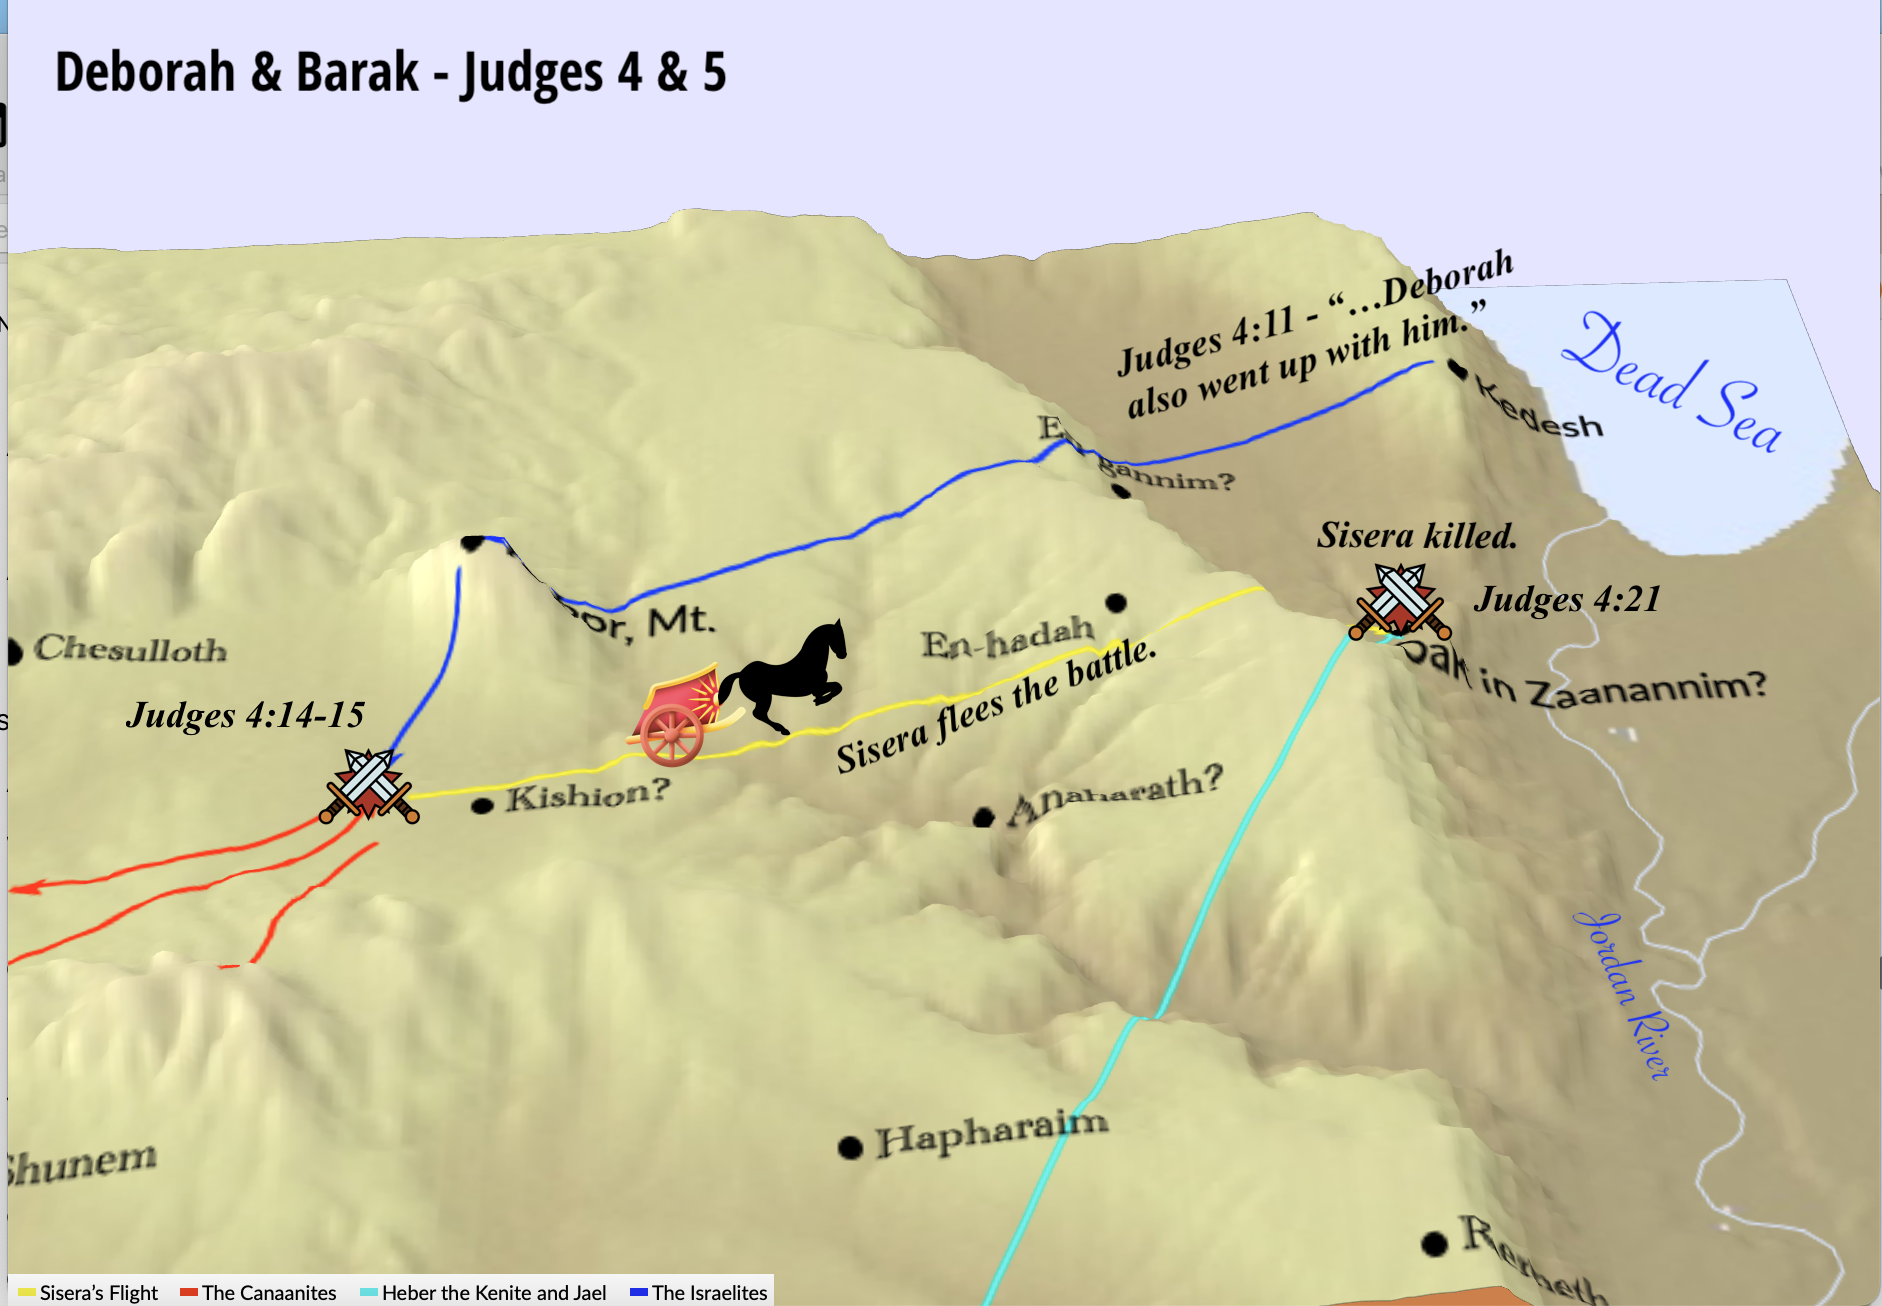 A map of the War of Deborah & Barak. The war took place within the tribal boundaries of Naphtali.